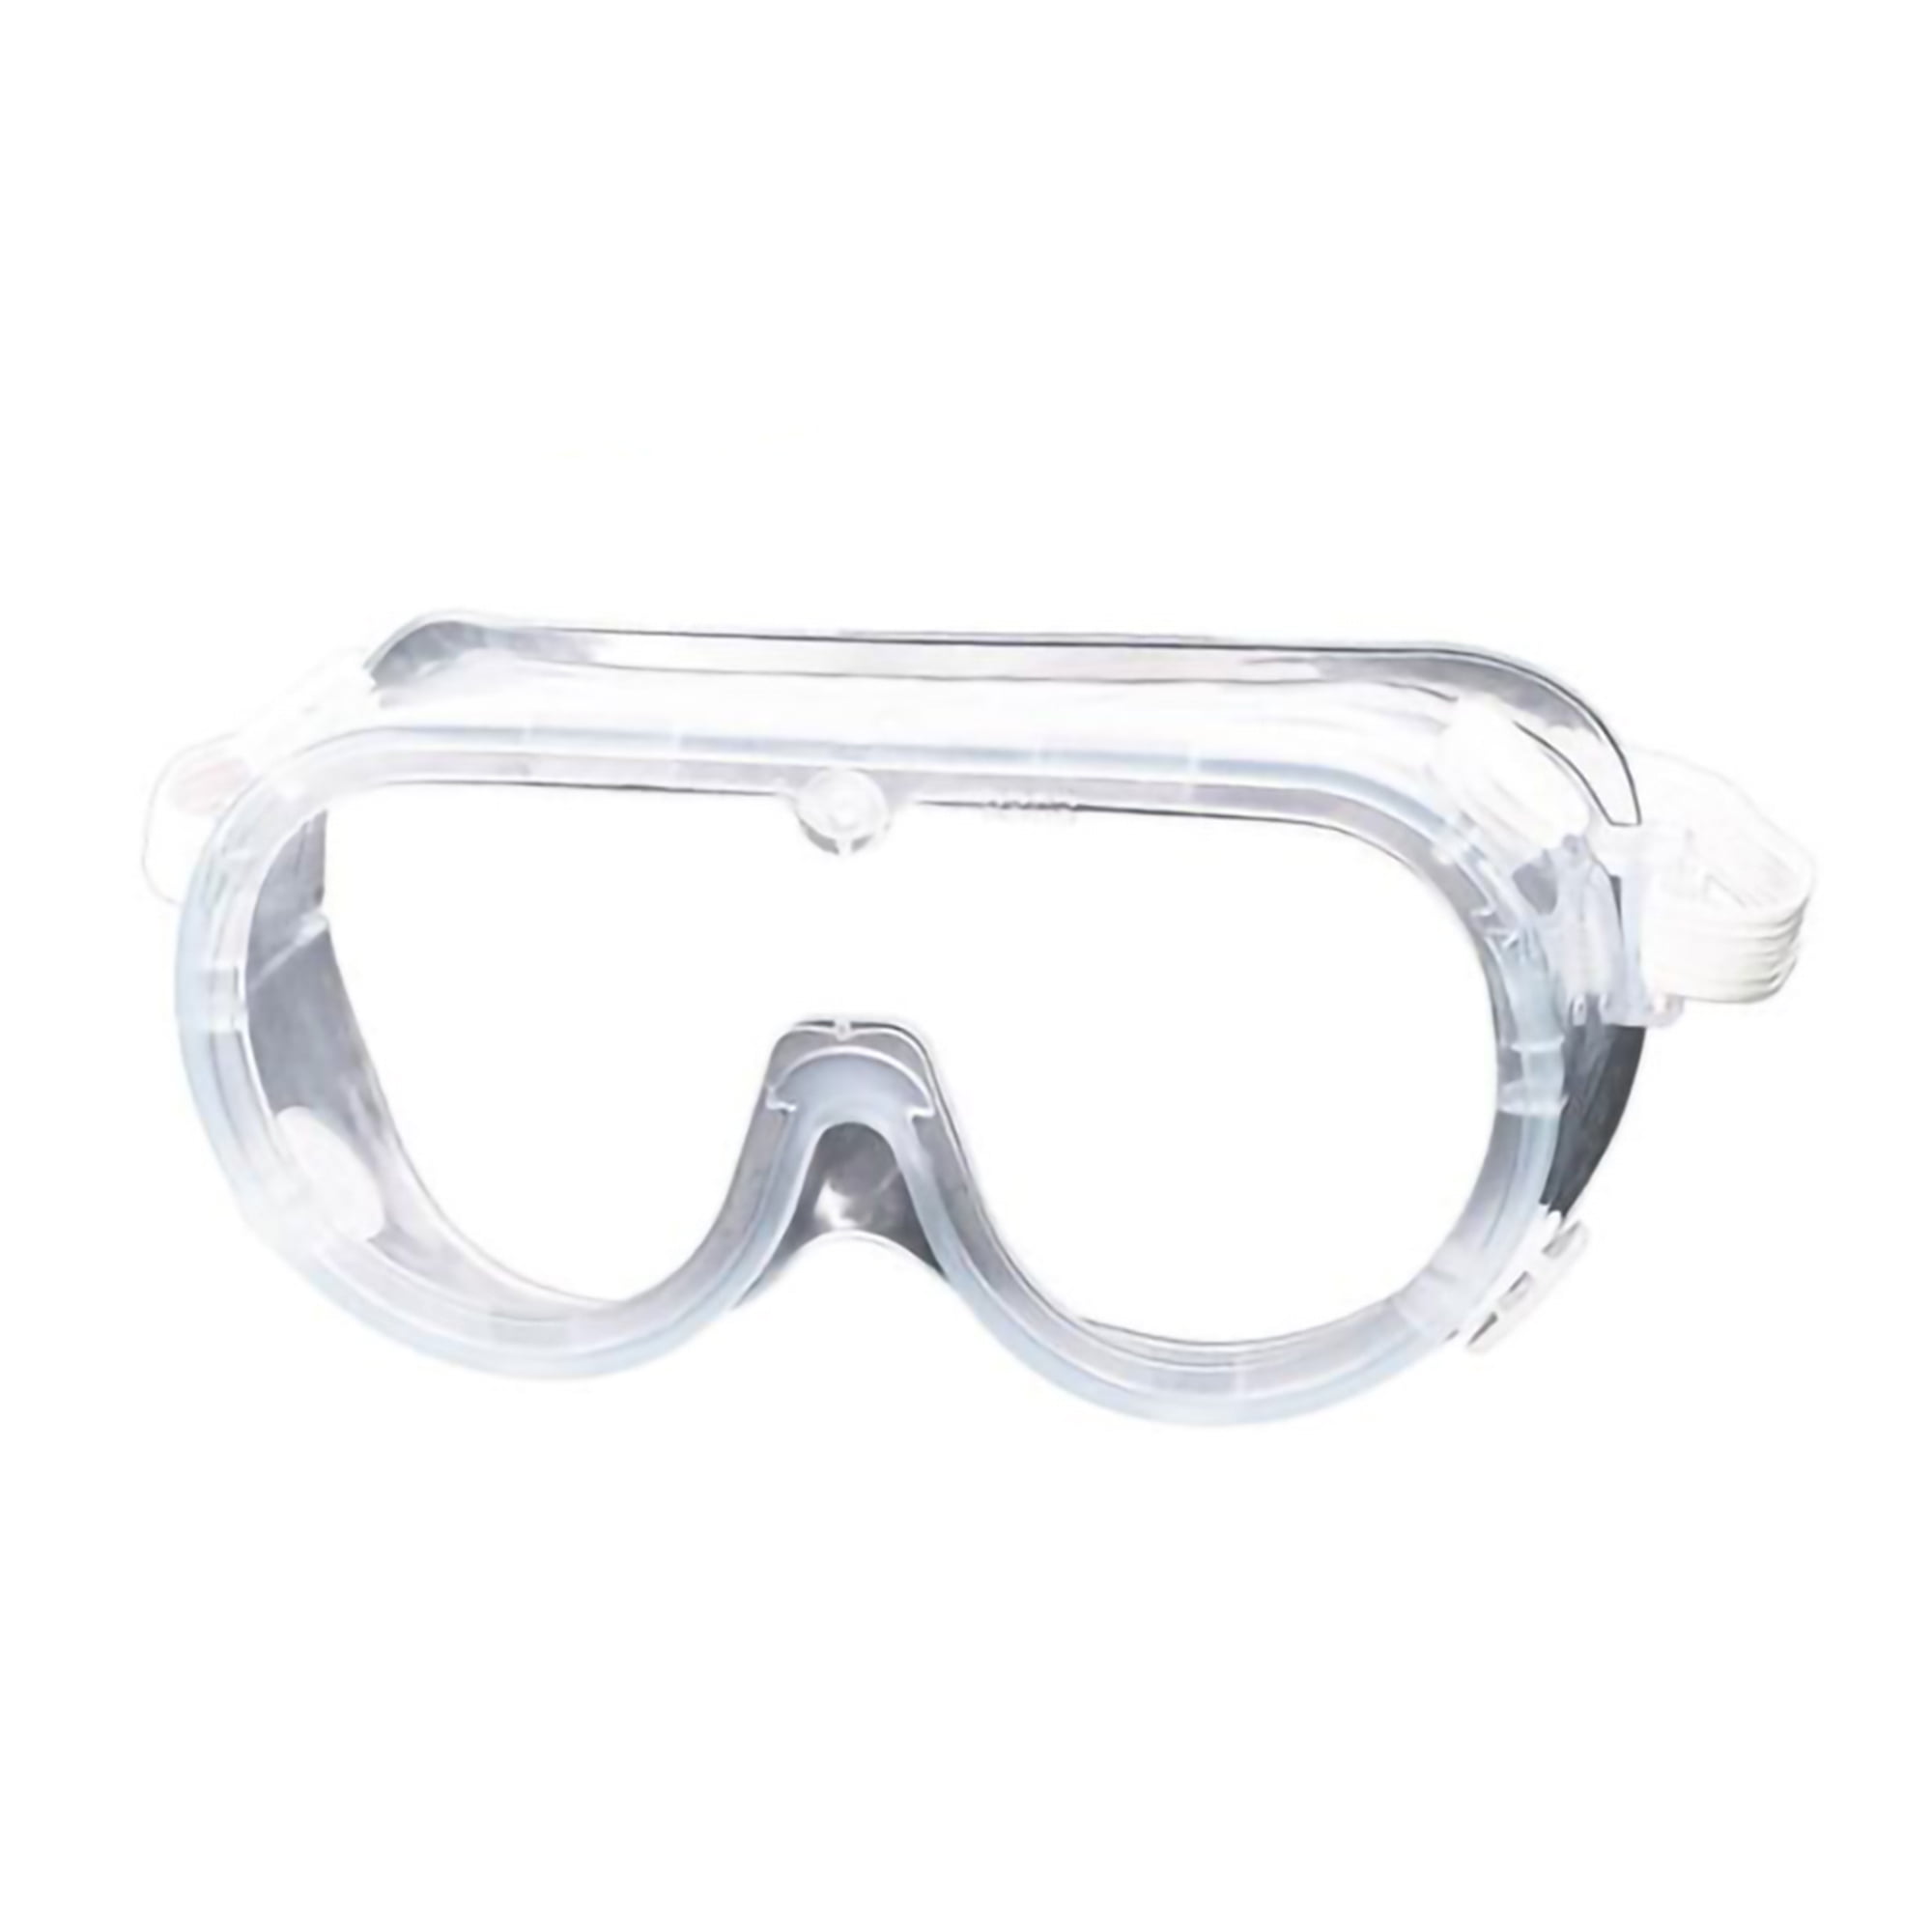 Black Frame Details about   Safety Glasses Adjustable Protective Goggles for Eye Protection 